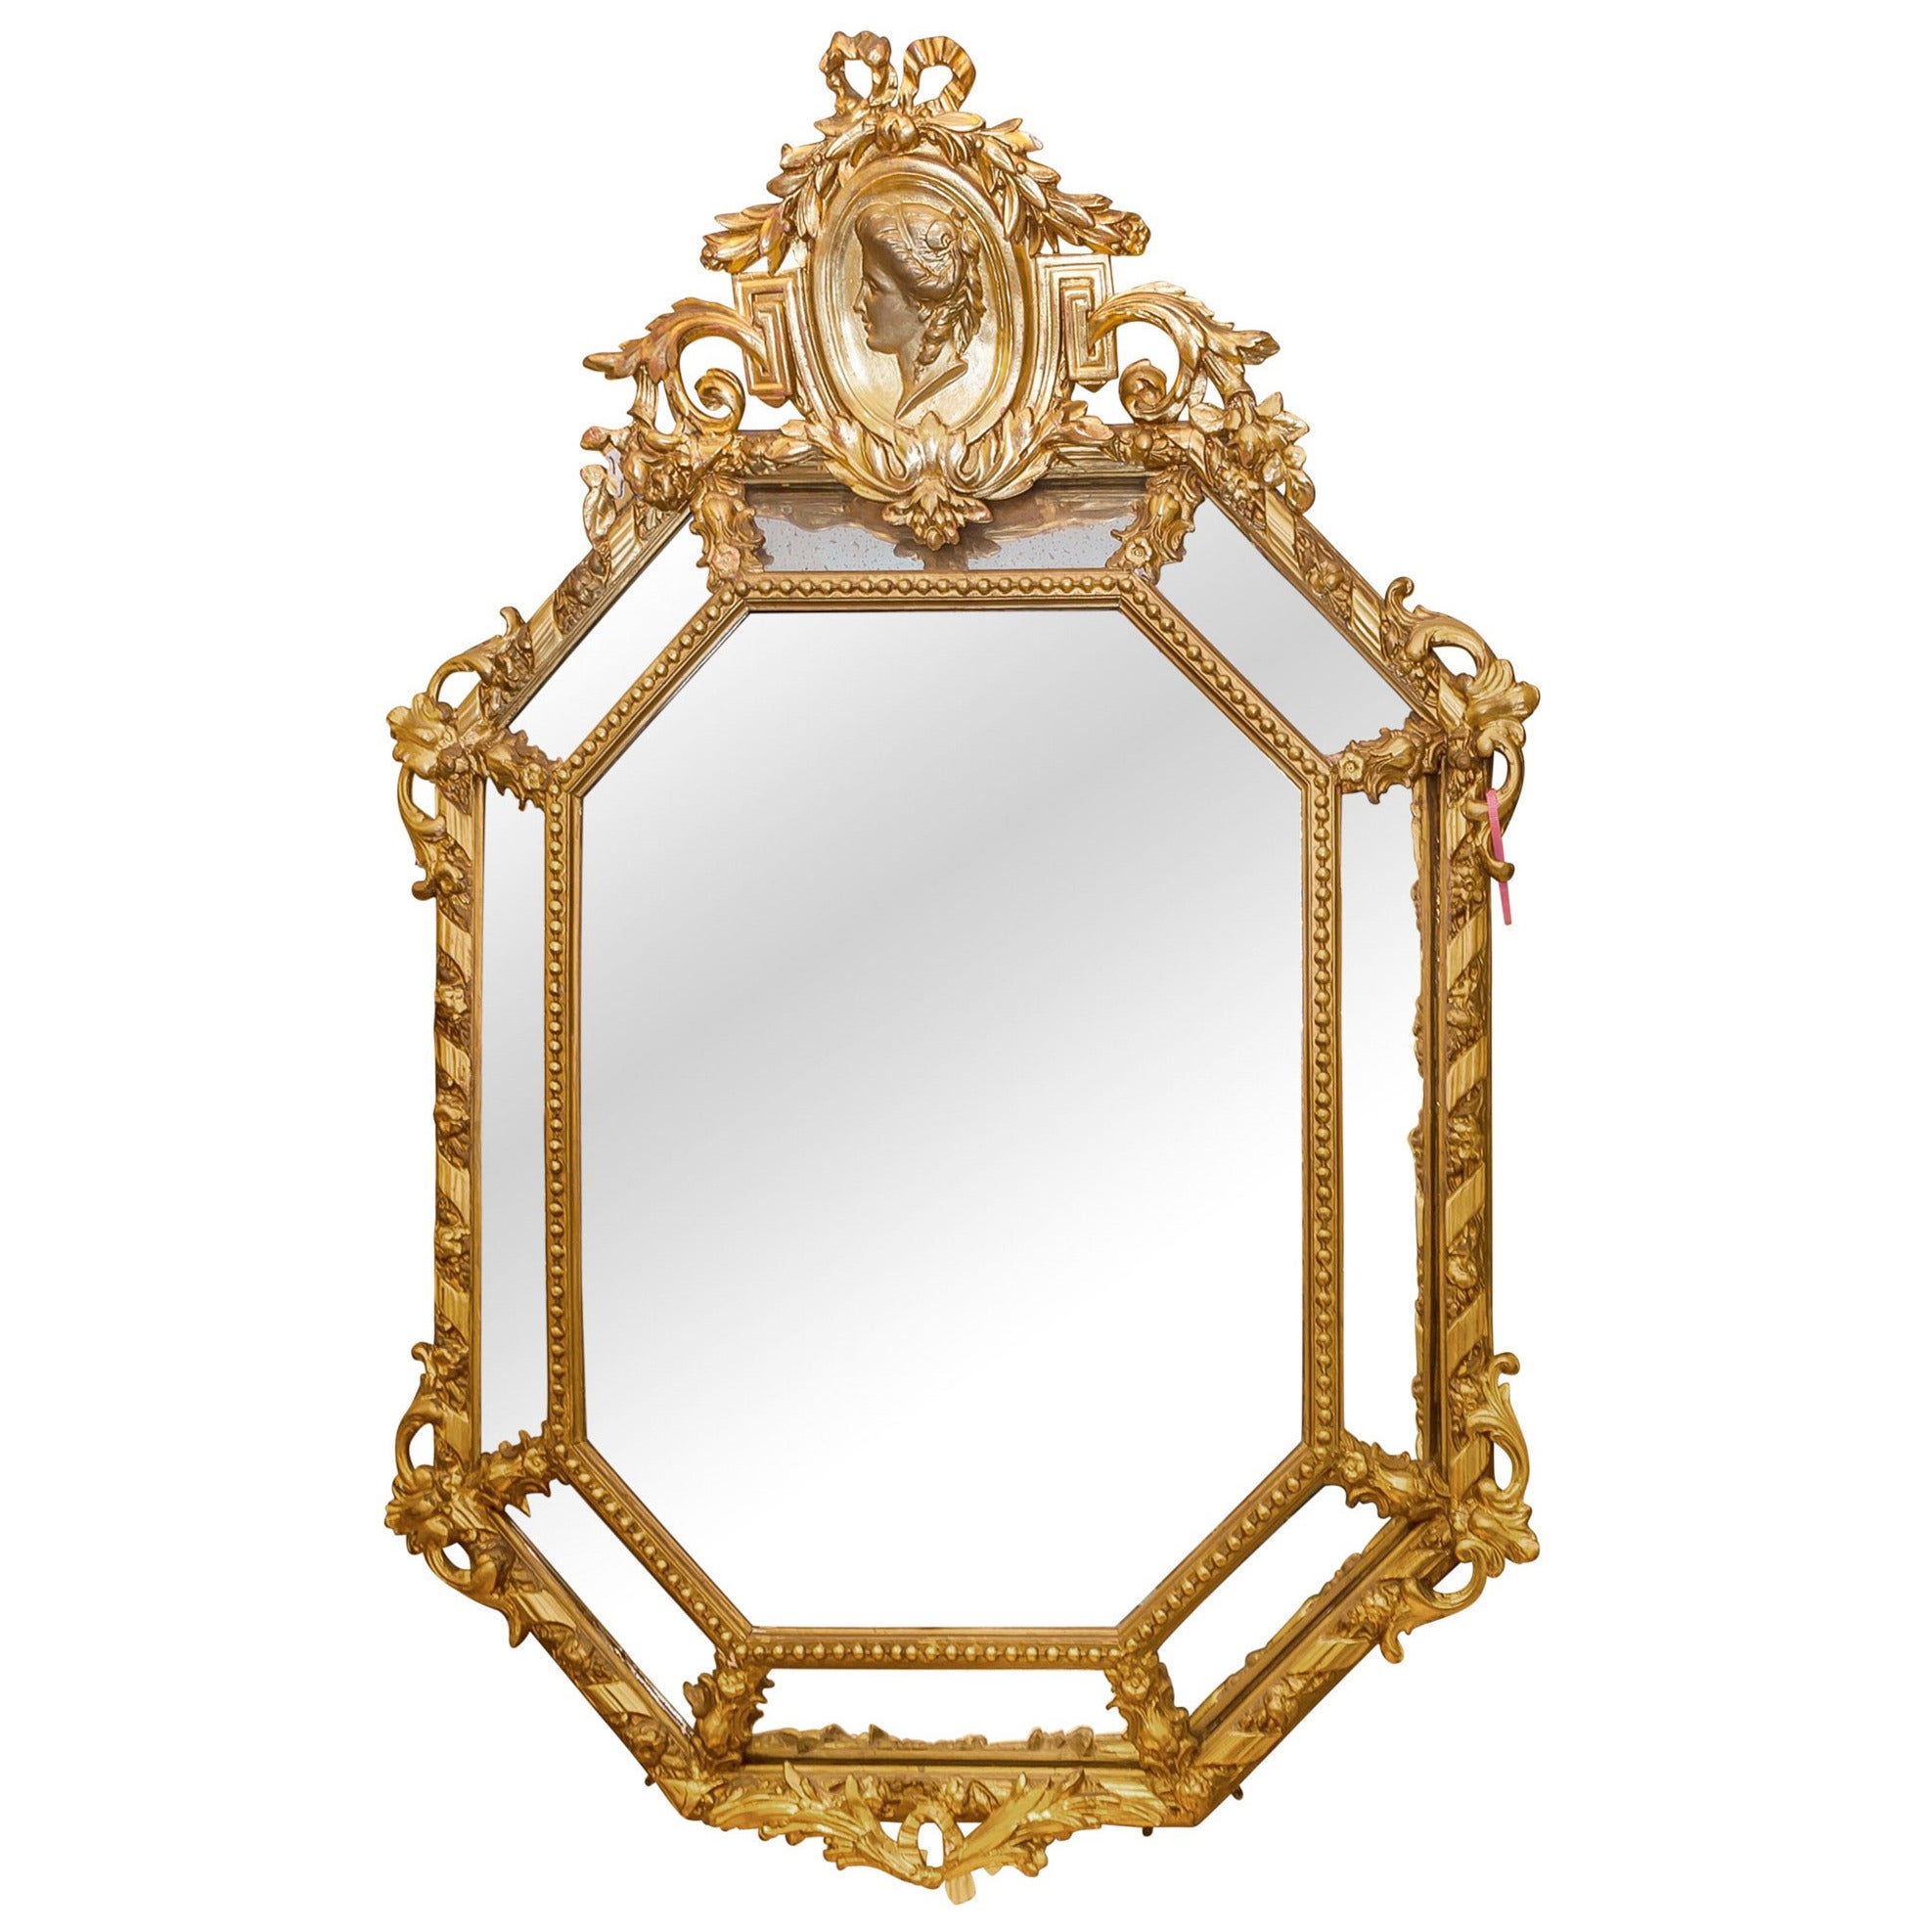 Neoclassical Georgian Style Giltwood and Gesso Mirror